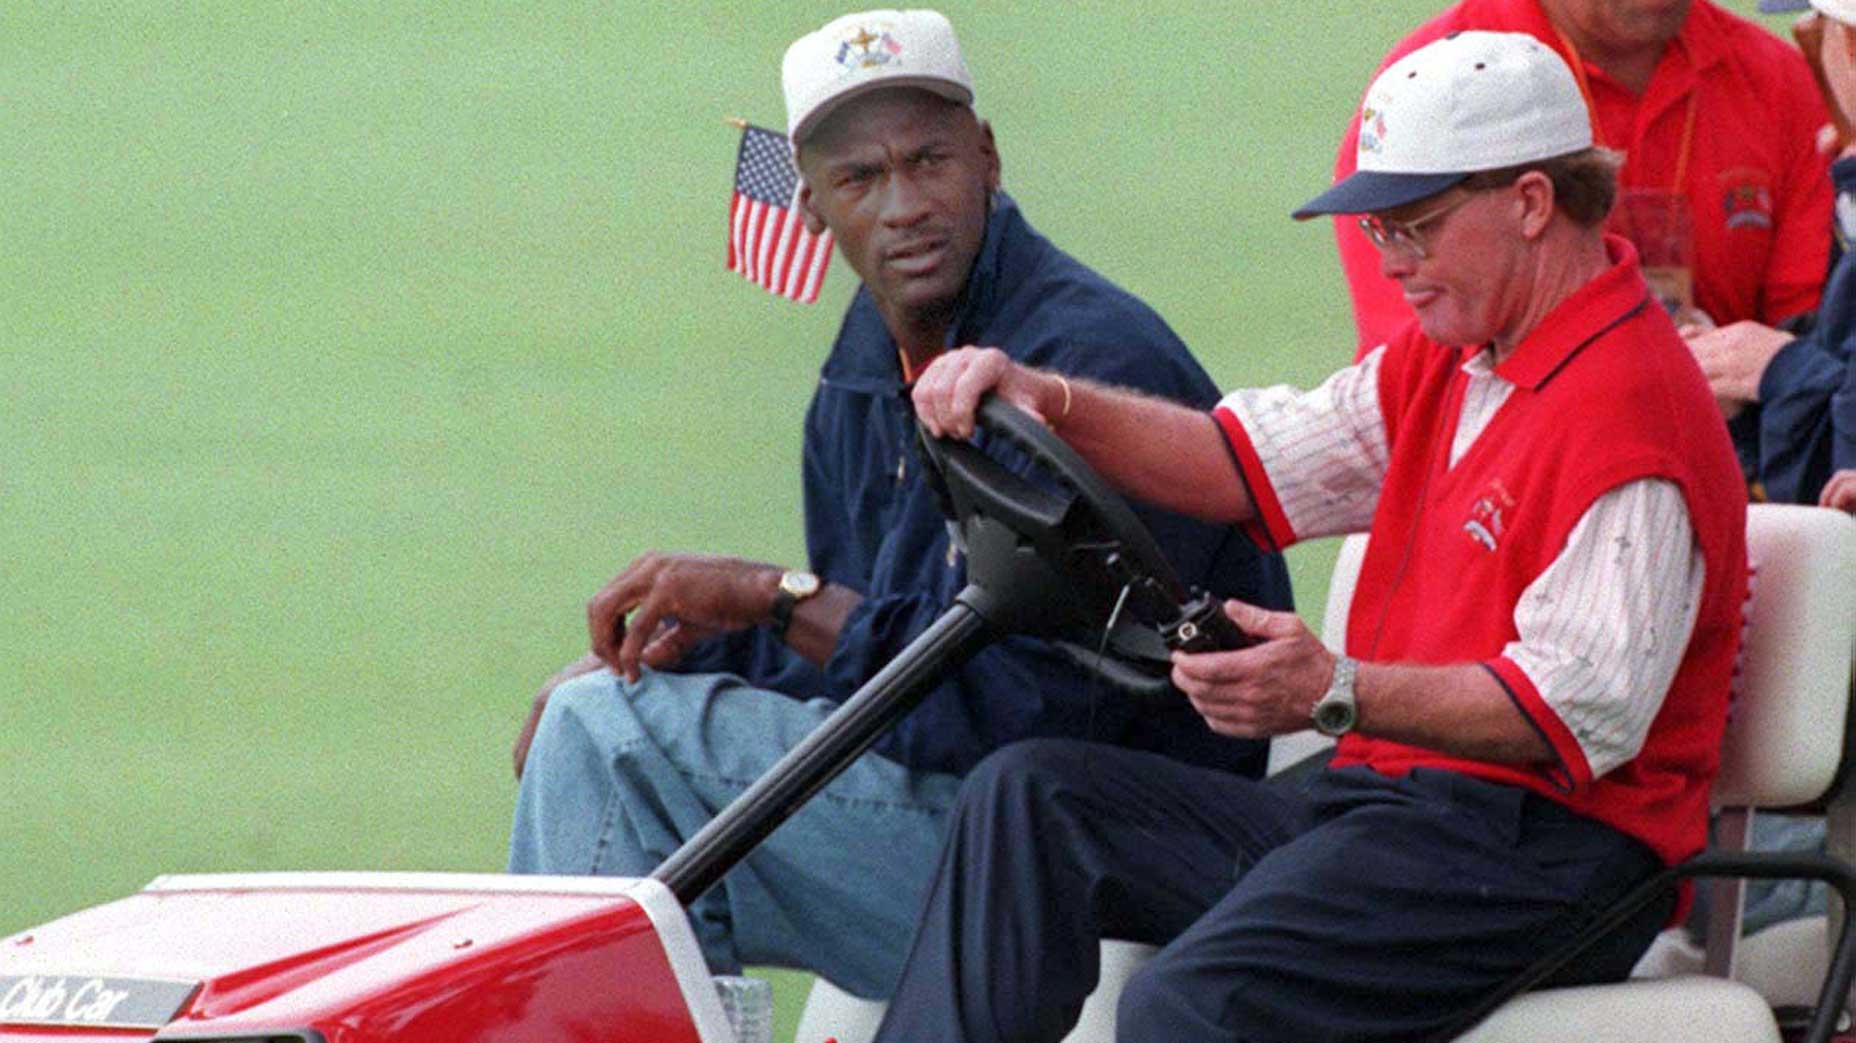 American Ryder Cup team Captain Tom Kite offers a lift to US Basket Ball player Michael Jordan (back, right). Jordan was following the fortunes of USA player Tiger Woods throughout the fourball match against Europe at Valderrama in Spain today (Saturday).